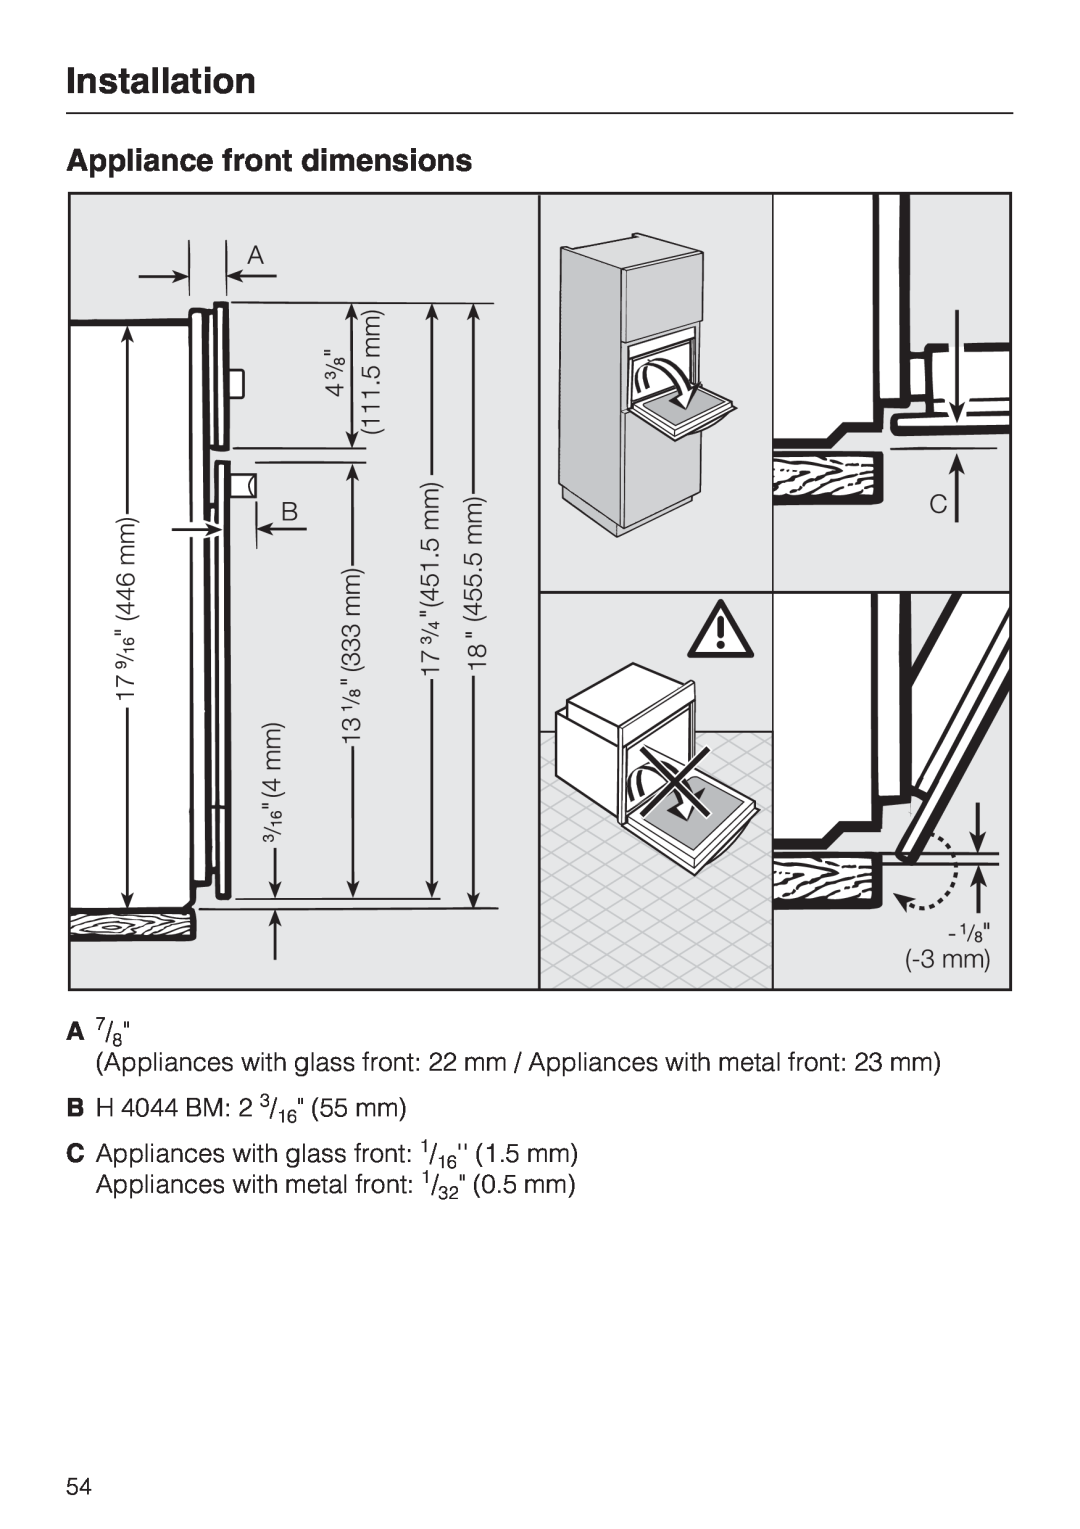 Miele H 4044 BM installation instructions Appliance front dimensions, Installation 